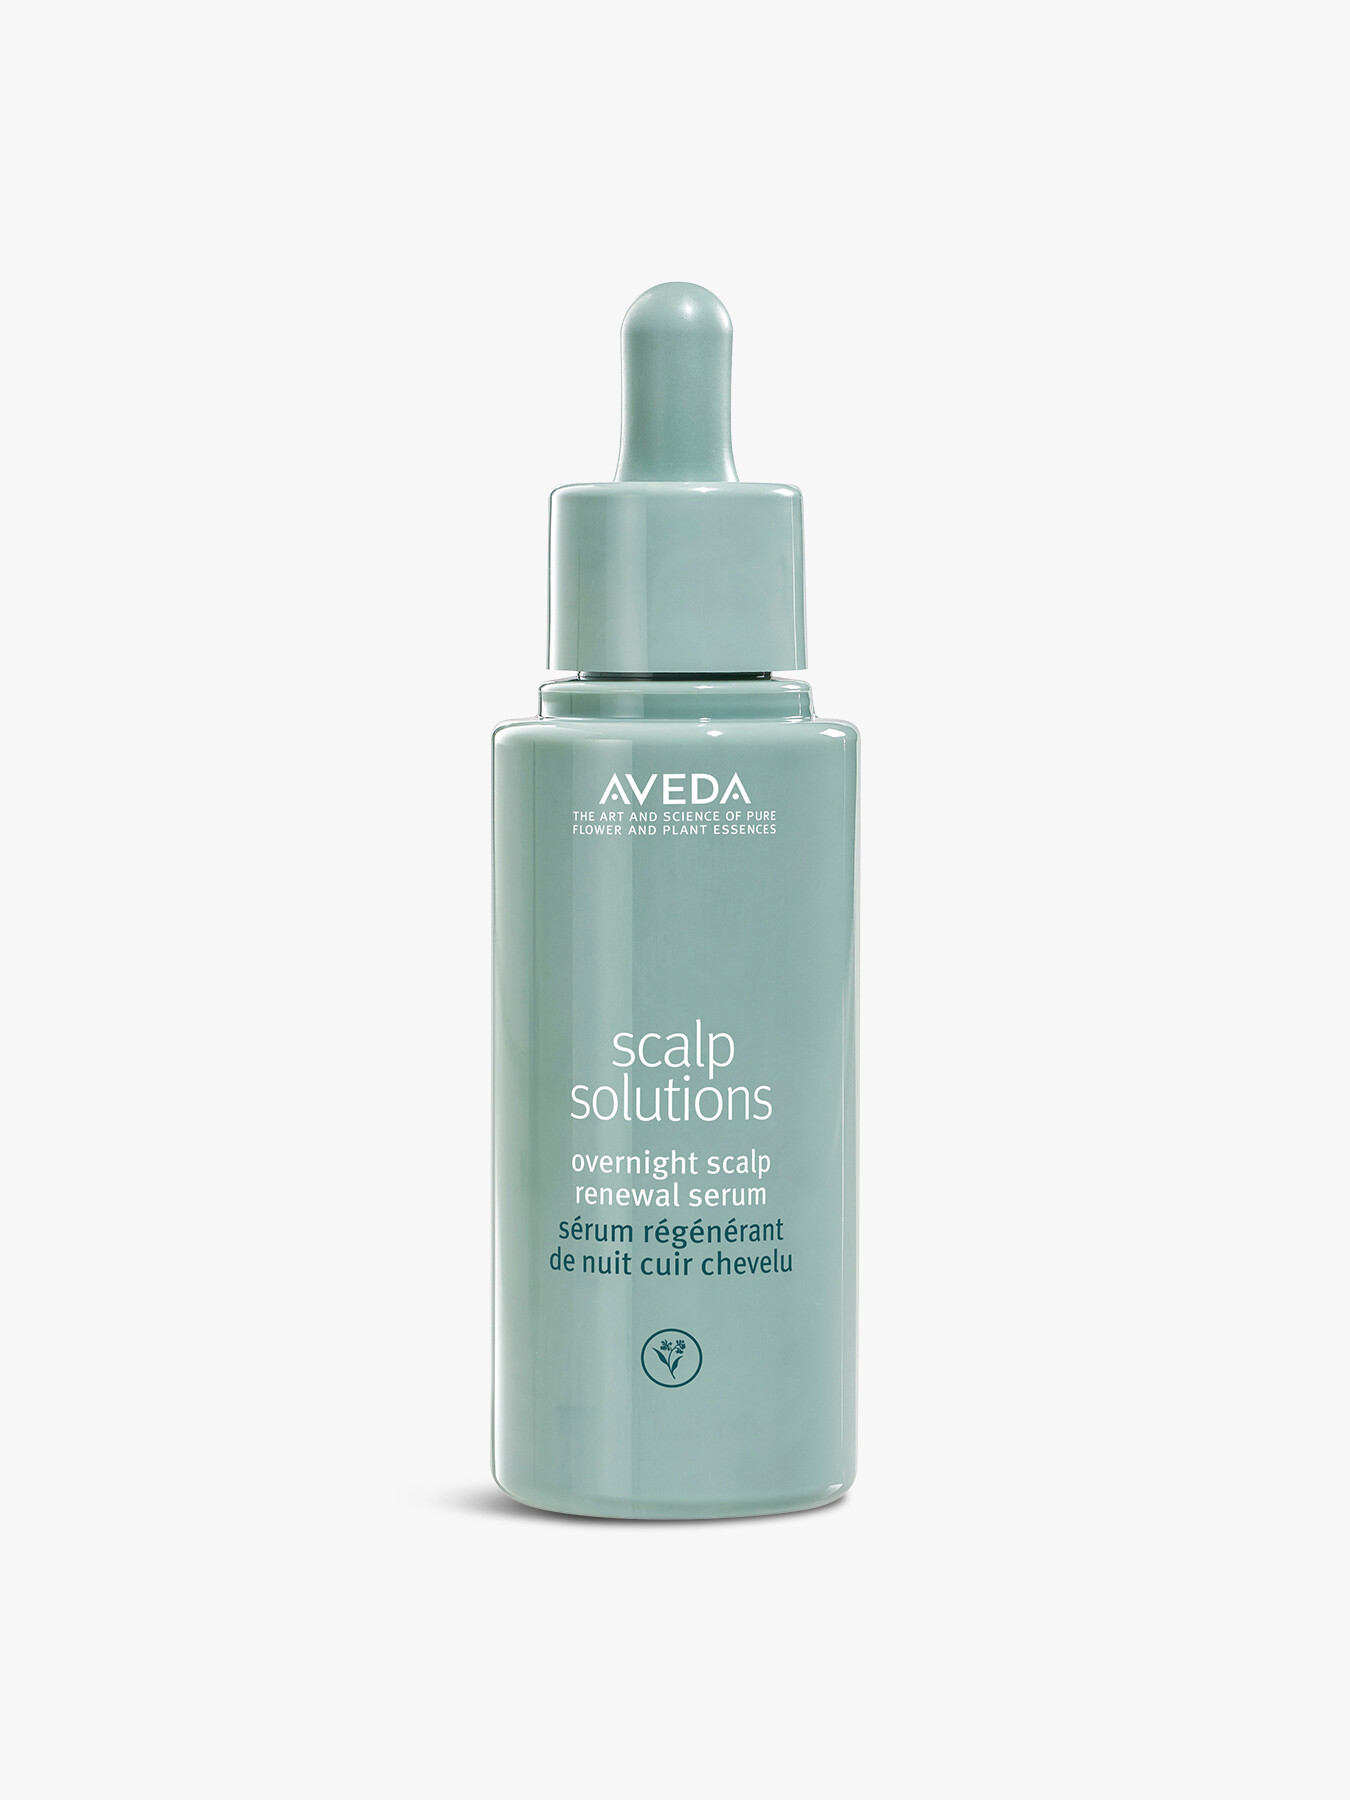 Aveda Scalp Solutions Overnight Scalp Renewal Serum (with Hyaluronic Acid)